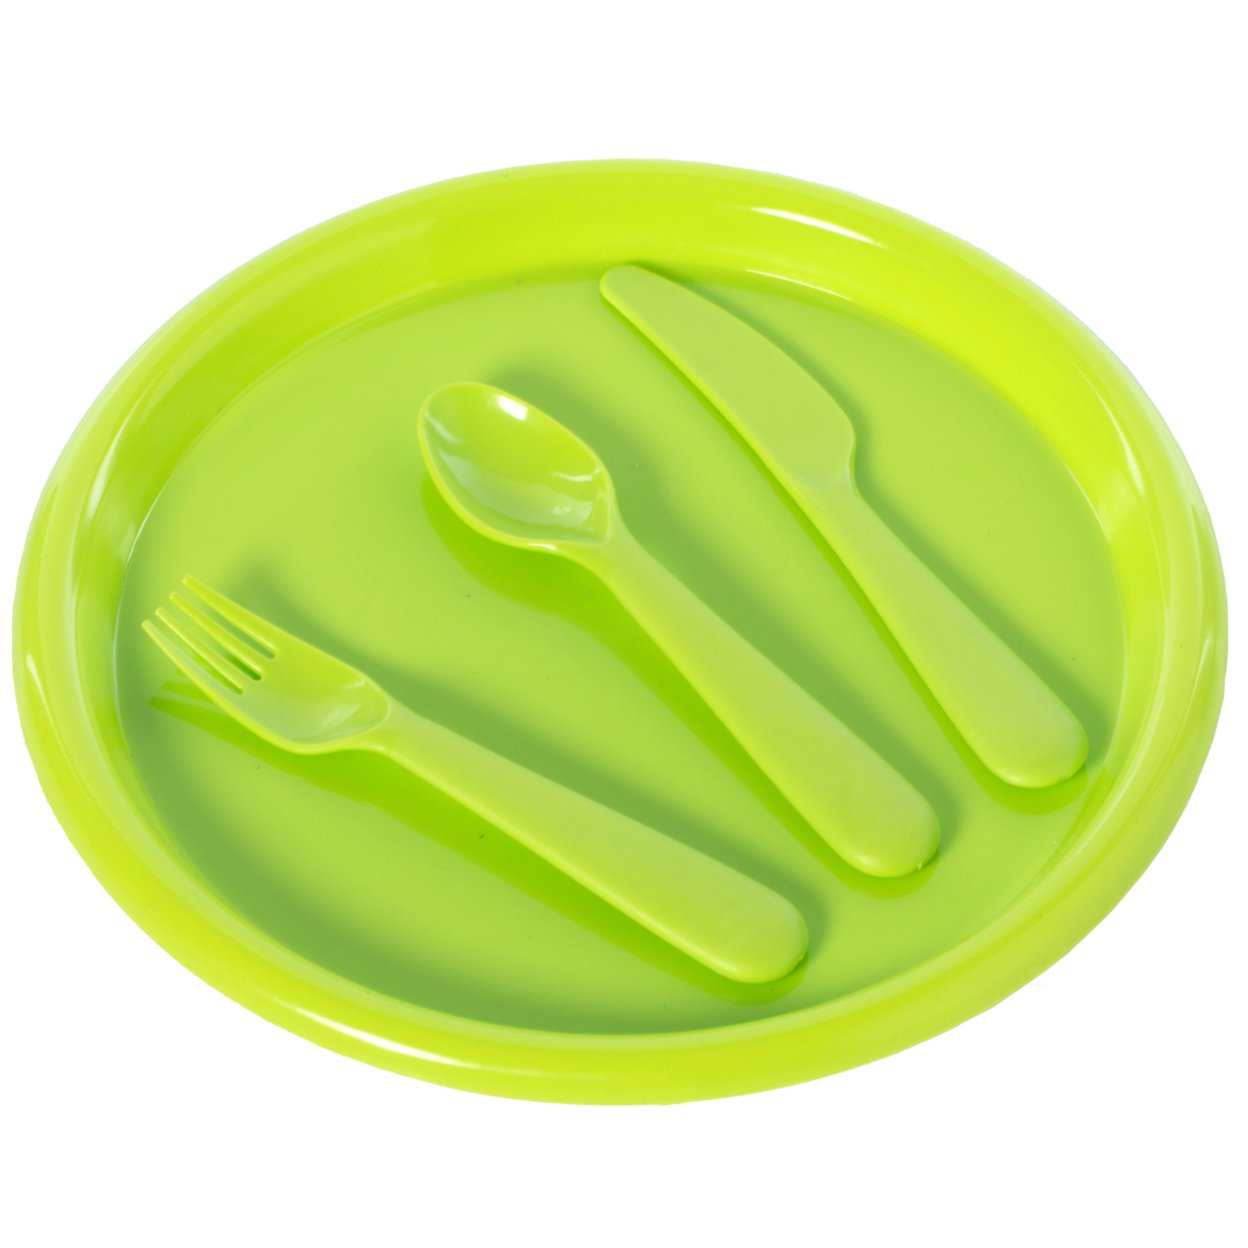 Reusable Cutlery Set Of 4 Plastic Plates, Spoons, Forks And Knives For Baby And Toddlers - Green